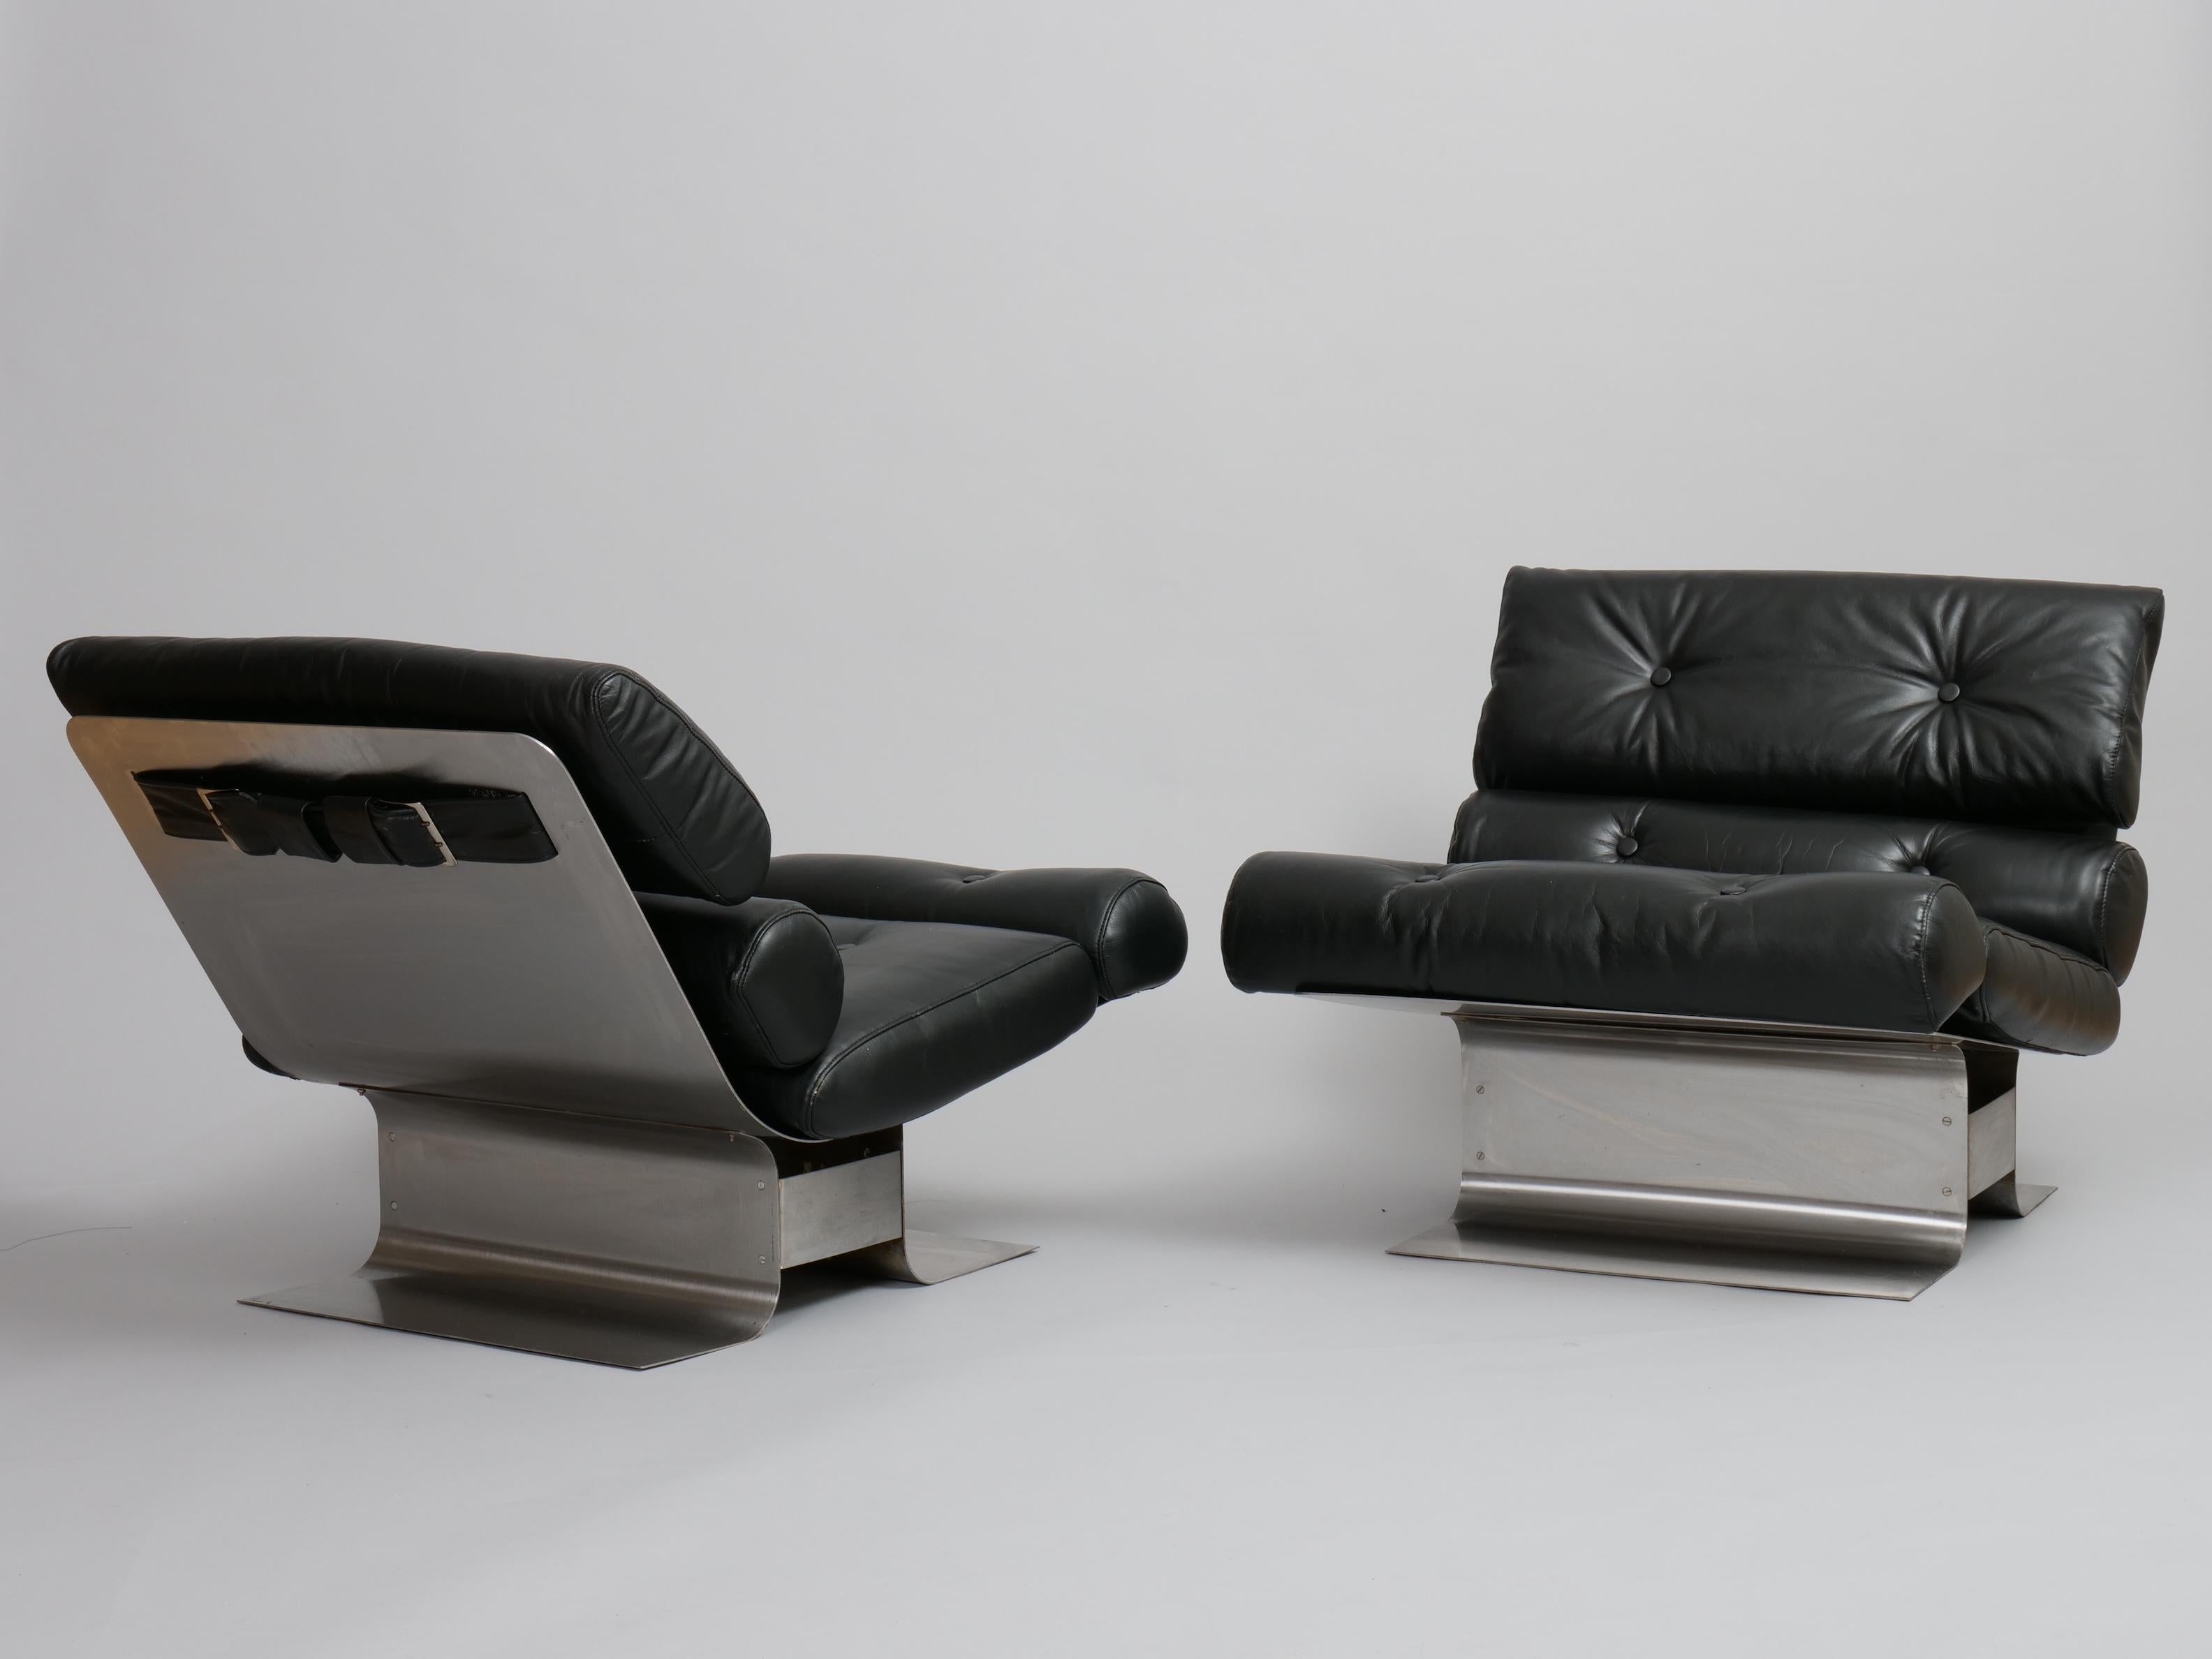 Rare pair of lounge chairs designed by Jean François Monnet and manufactured by Kappa, France, in 1972.

Very rare to find as less than a hundred chairs were made. 

These are in fantastic original condition. 